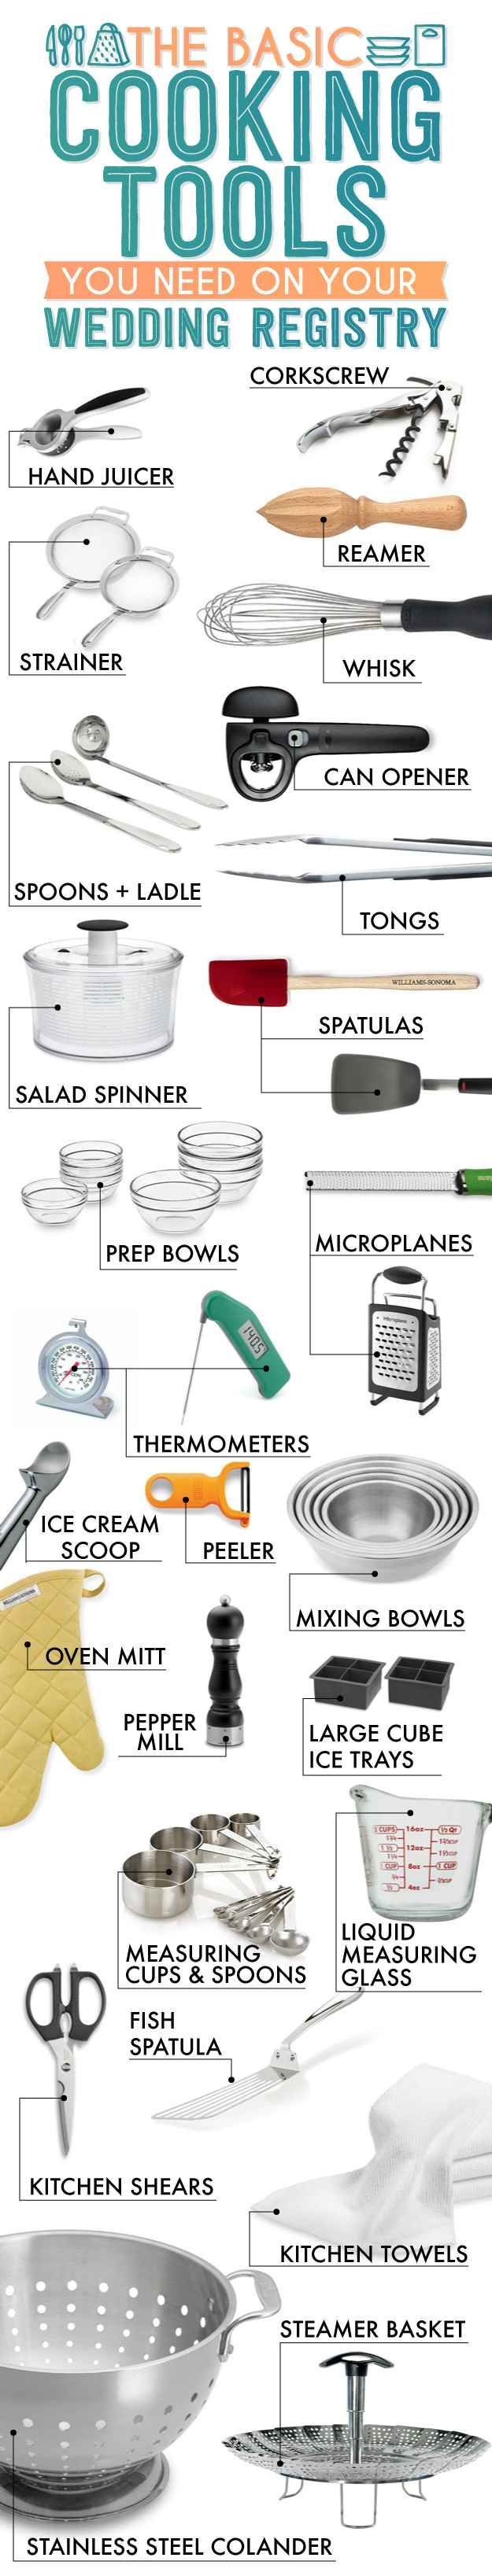 Basic Cooking Tools.  The E